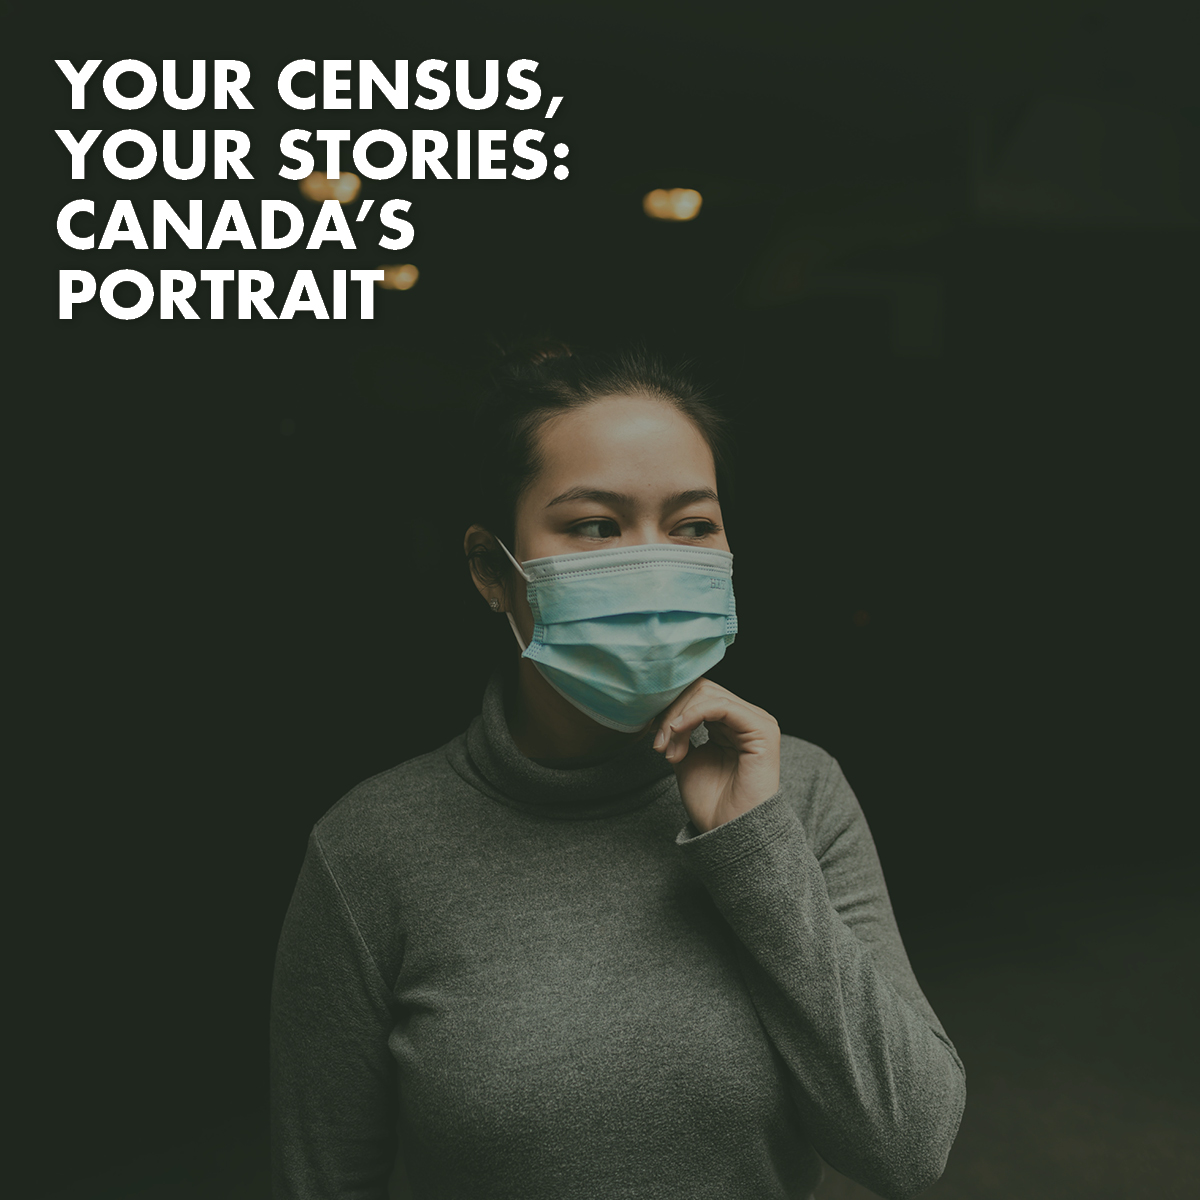 Woman wearing a medical mask Text overlay says "Your census, your stories: Canada's portrait"